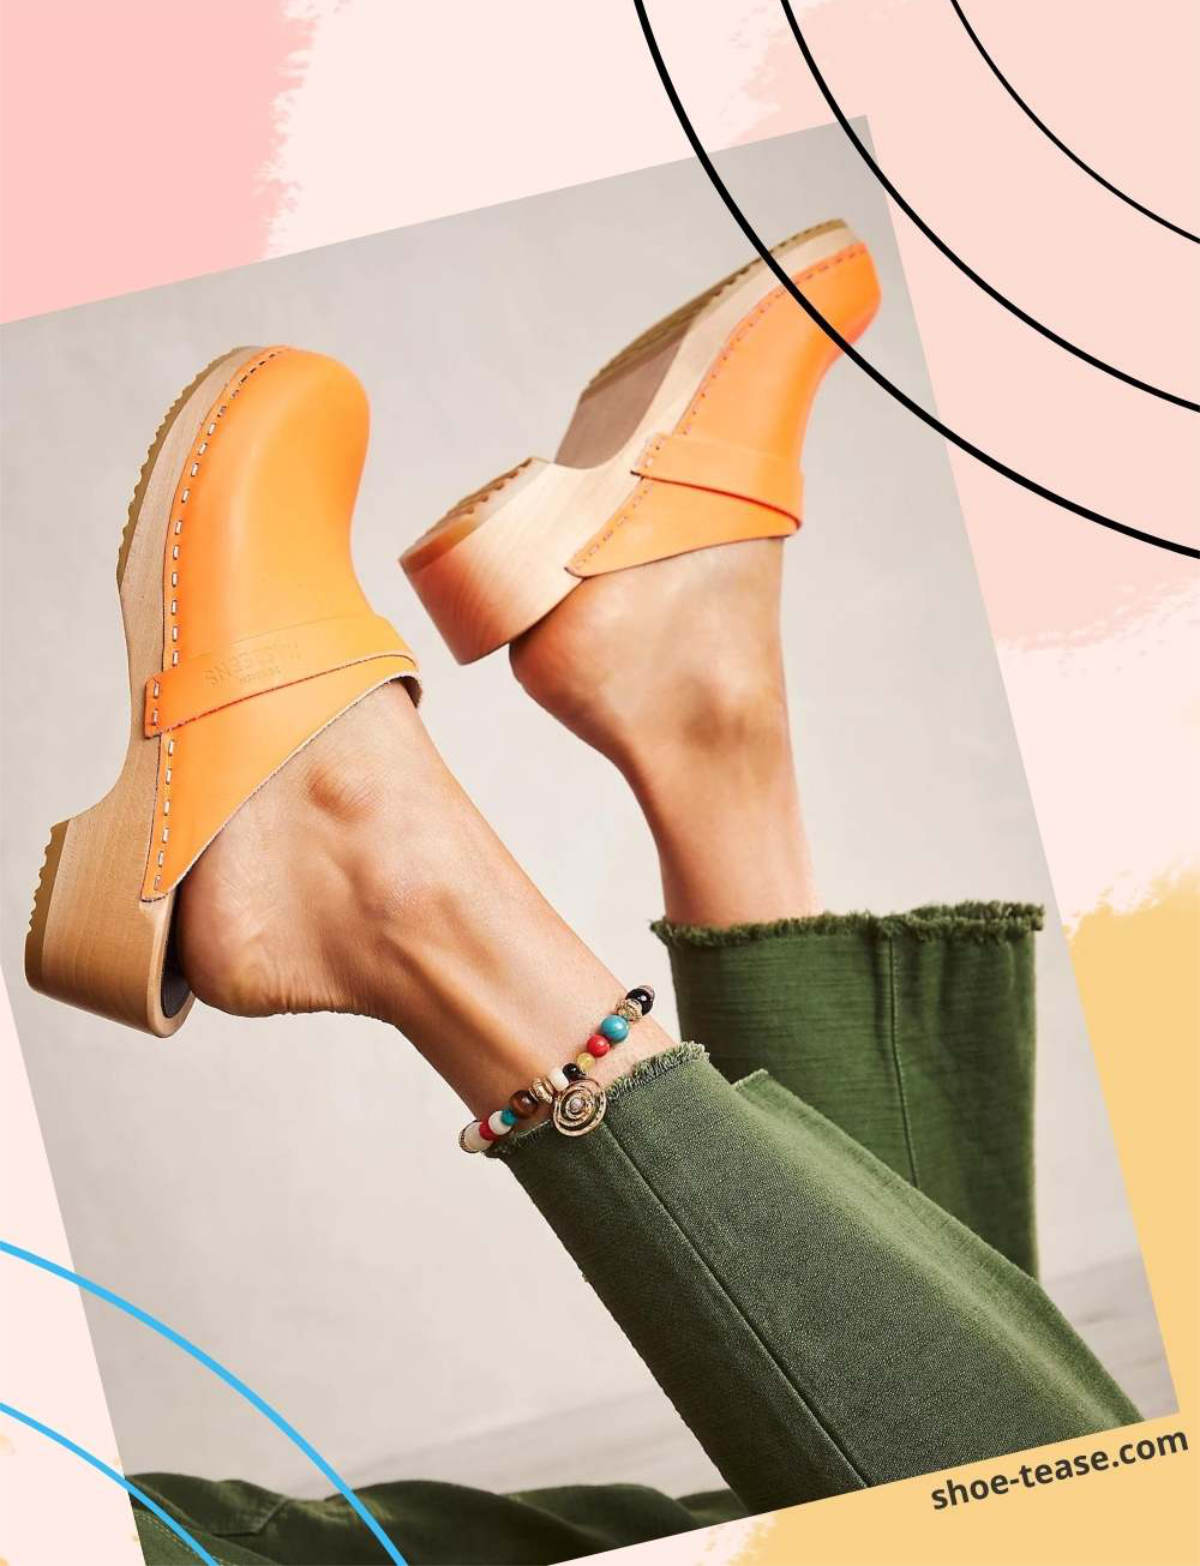 Collage with close up of woman's feet wearing orange clogs outfit with green jeans.